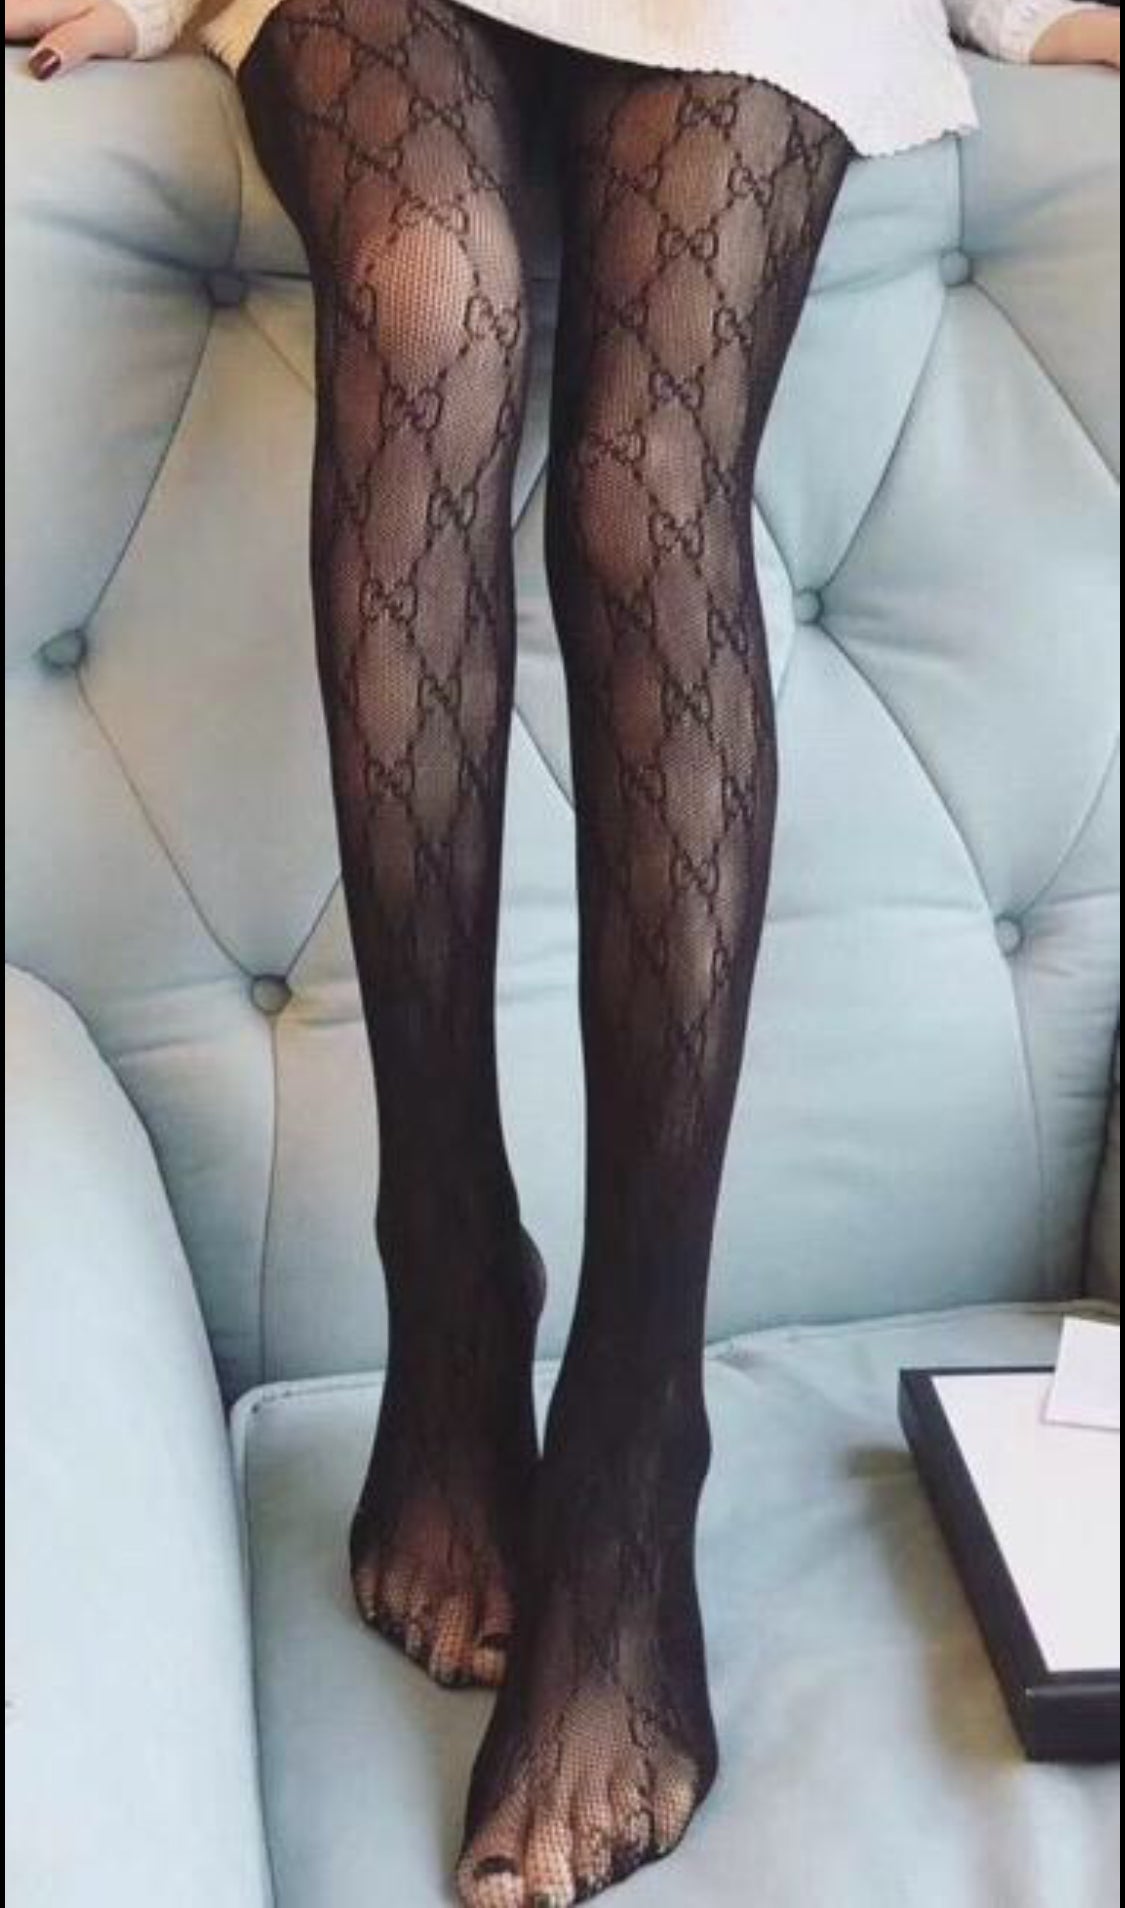 DOLL FURS - GG GUCCI TIGHTS NOW IN STOCK £30 Including